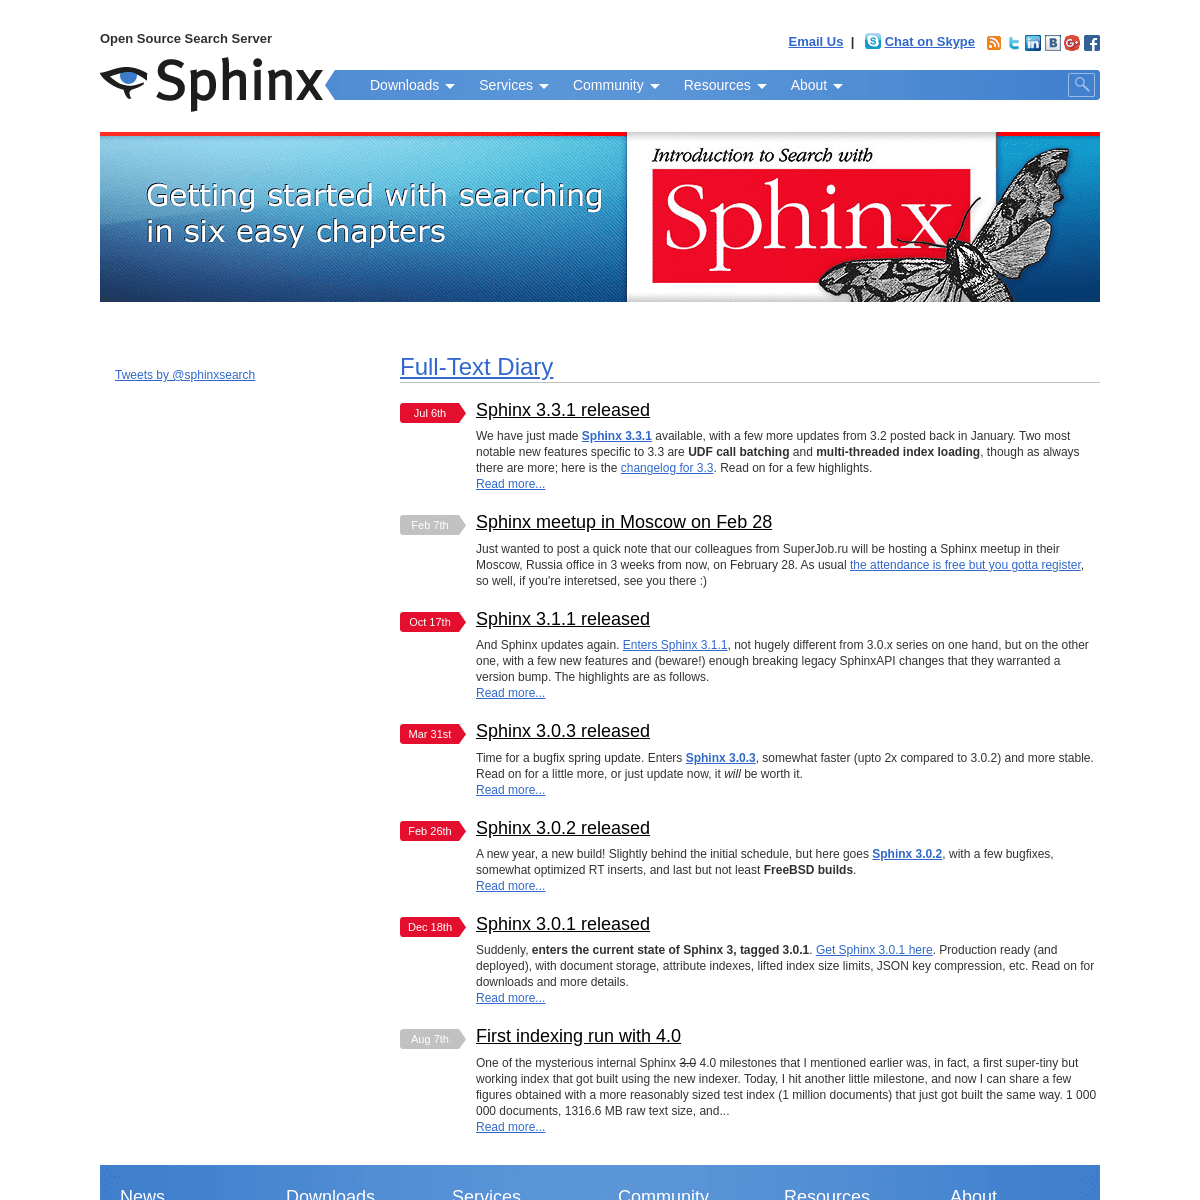 A complete backup of https://sphinxsearch.com